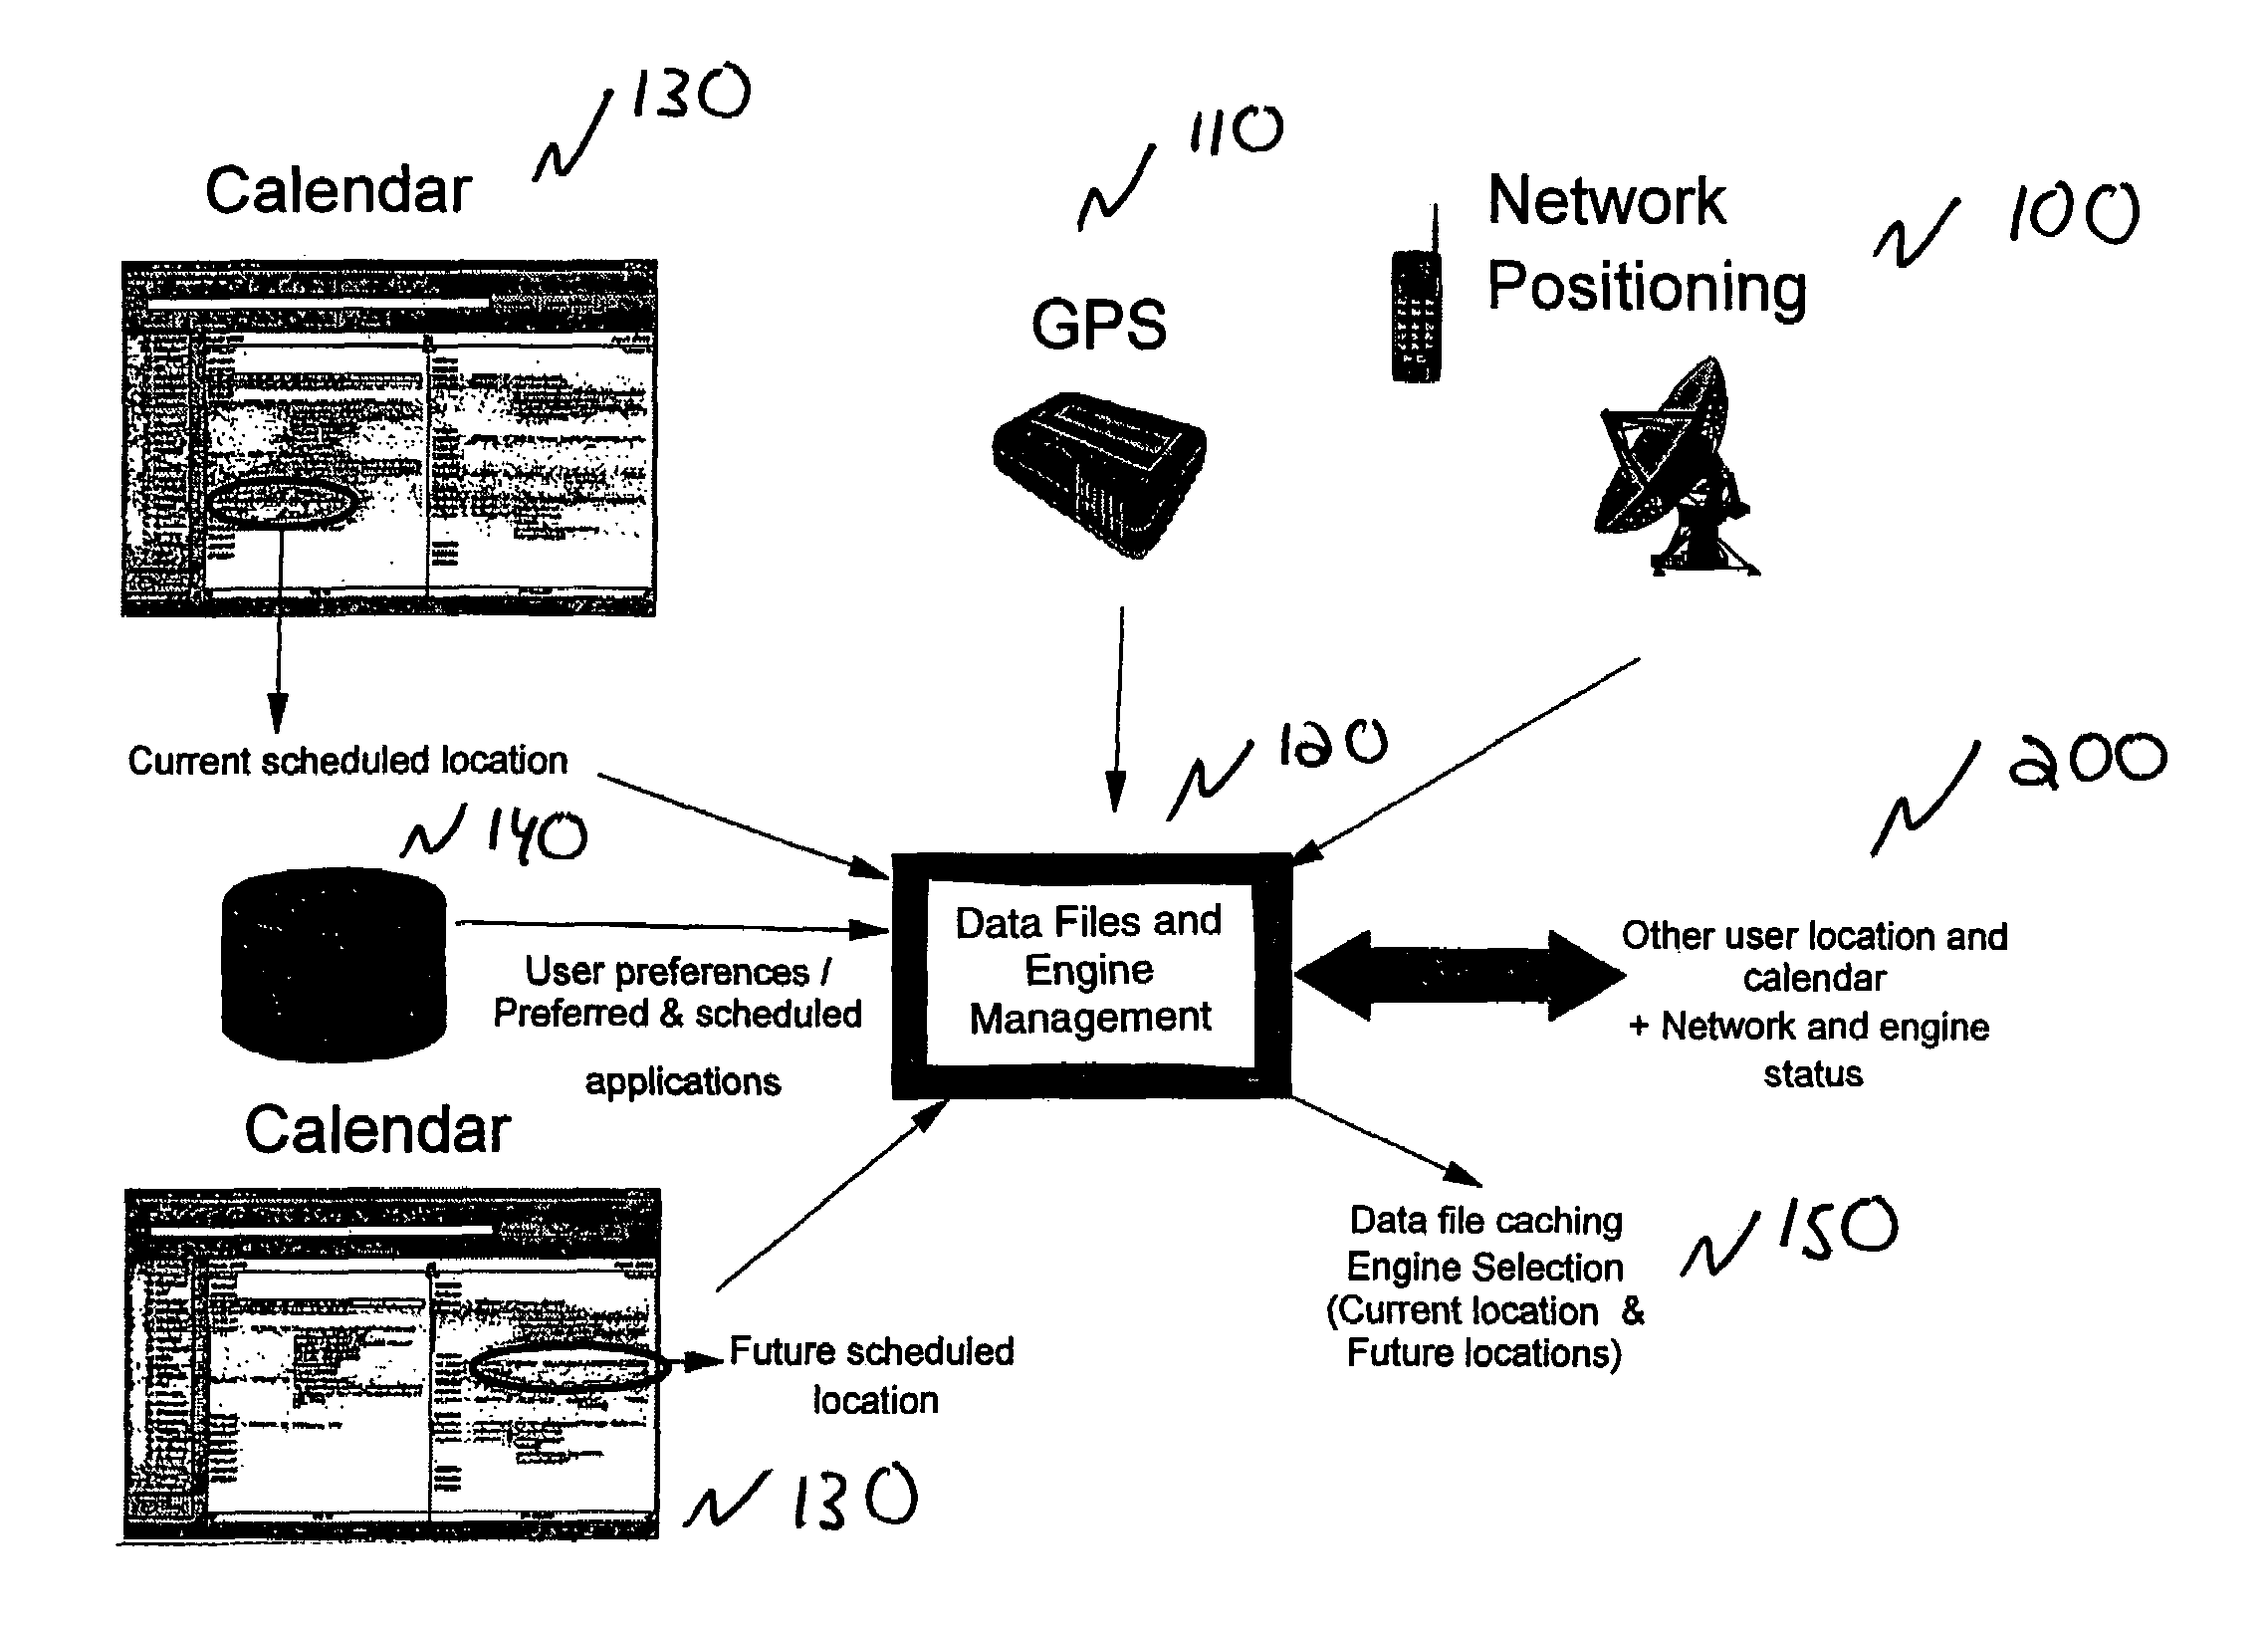 Resource configuration in multi-modal distributed computing systems